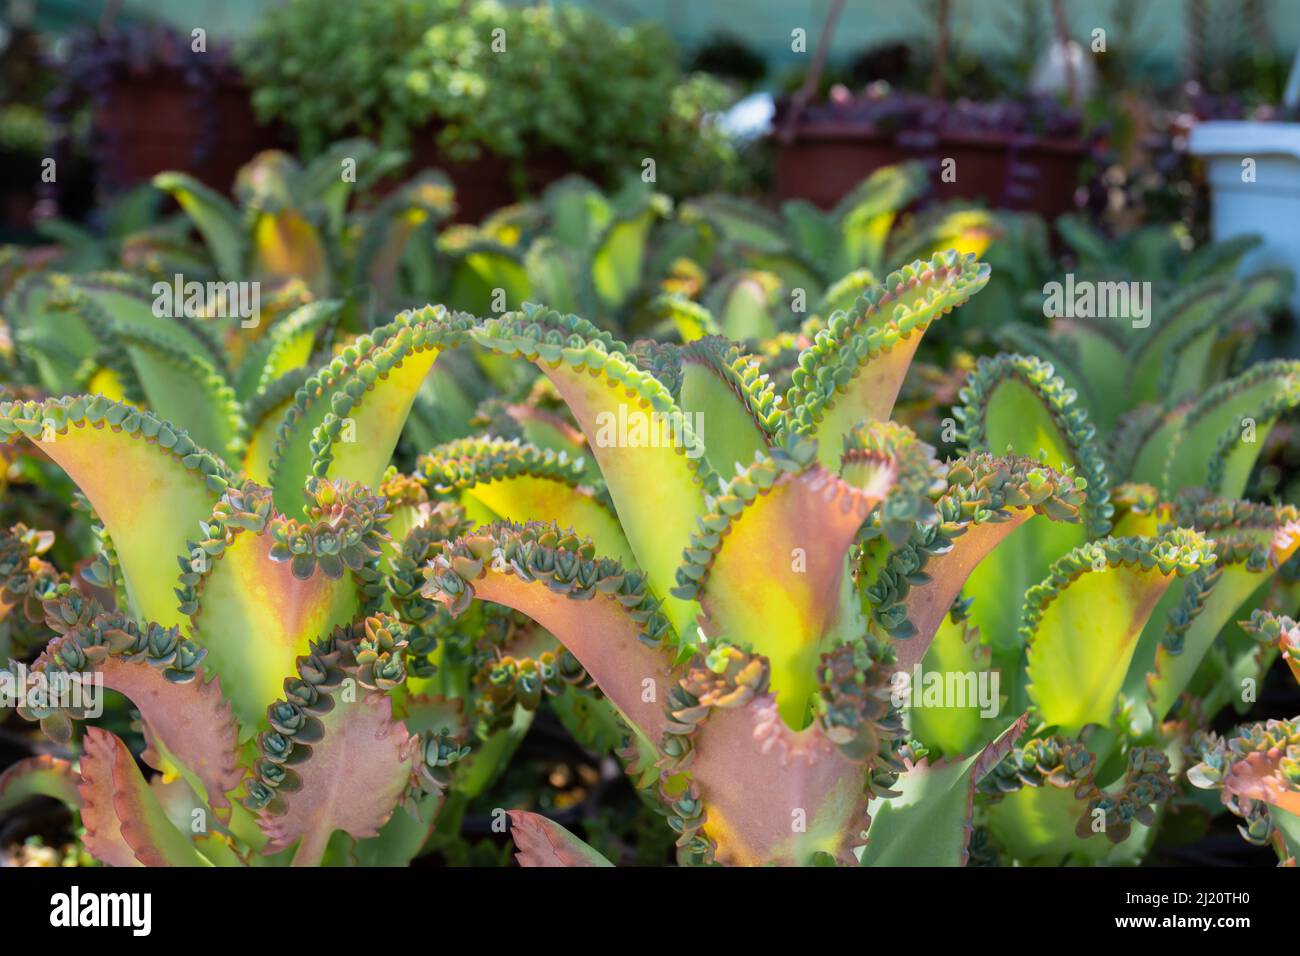 Kalanchoe daigremontiana, formerly known as Bryophyllum daigremontianum and commonly called mother of thousands, alligator plant, or Mexican hat plant Stock Photo